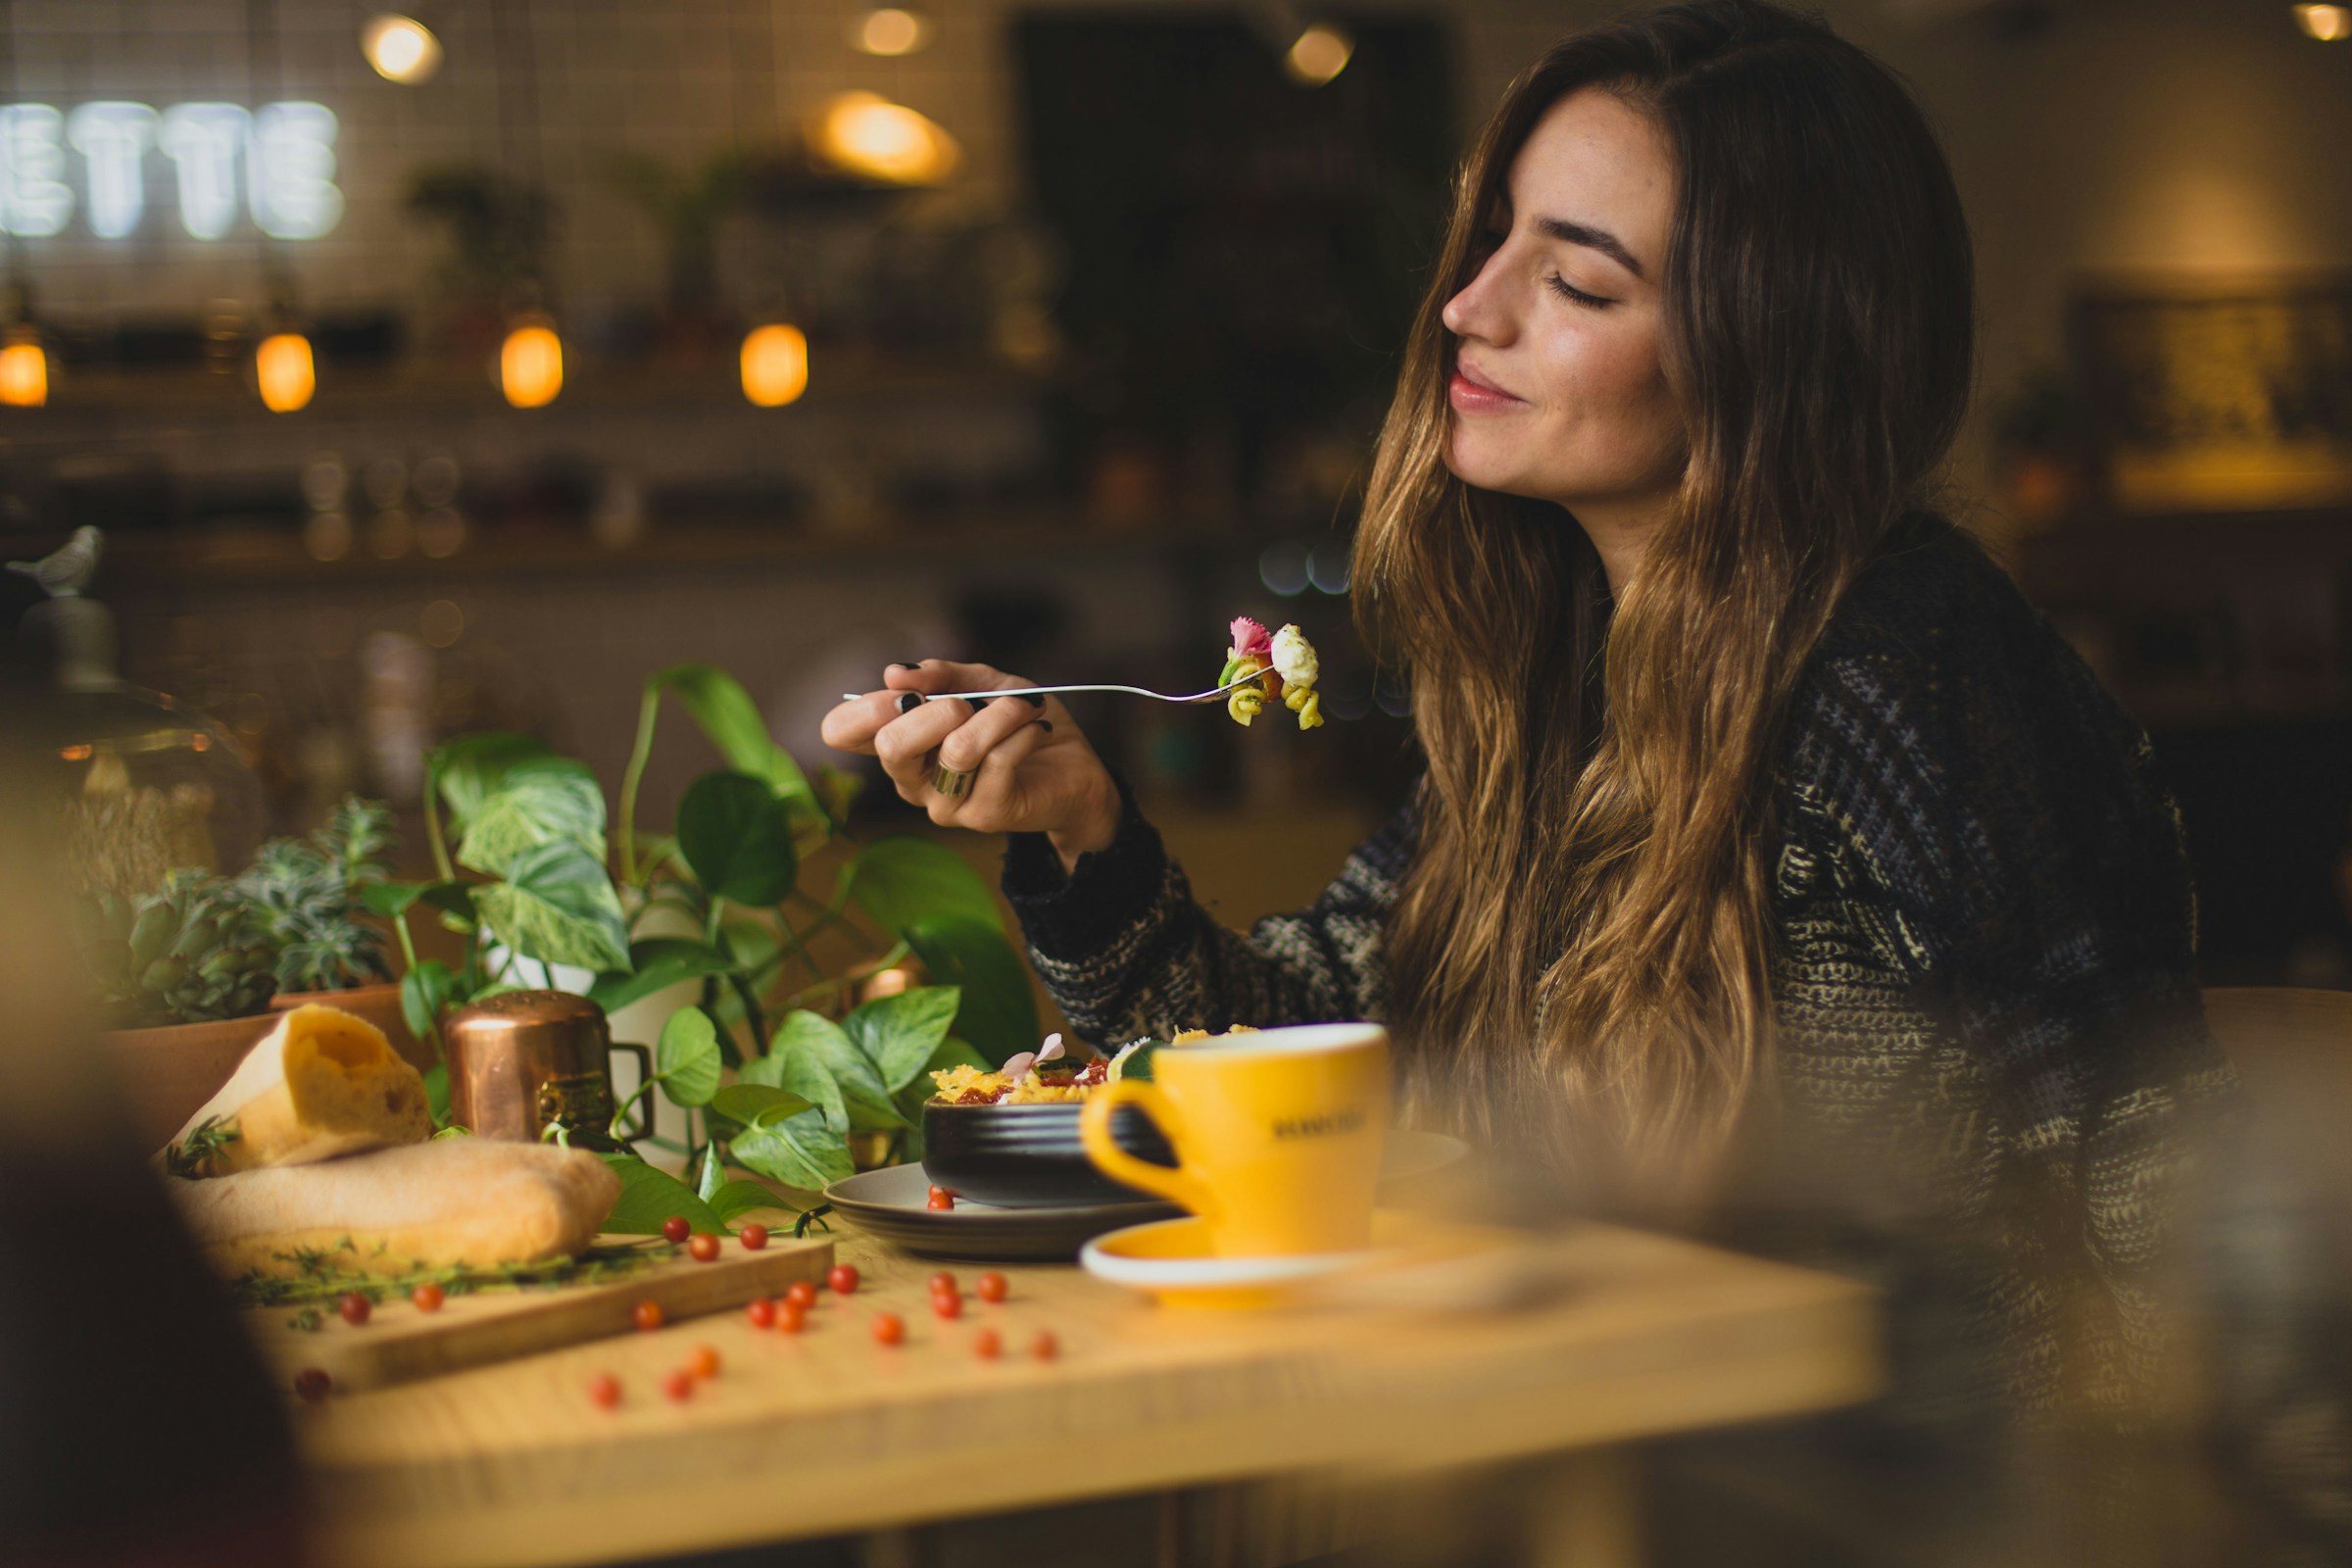 A woman eating at a restaurant | Source: Unsplash